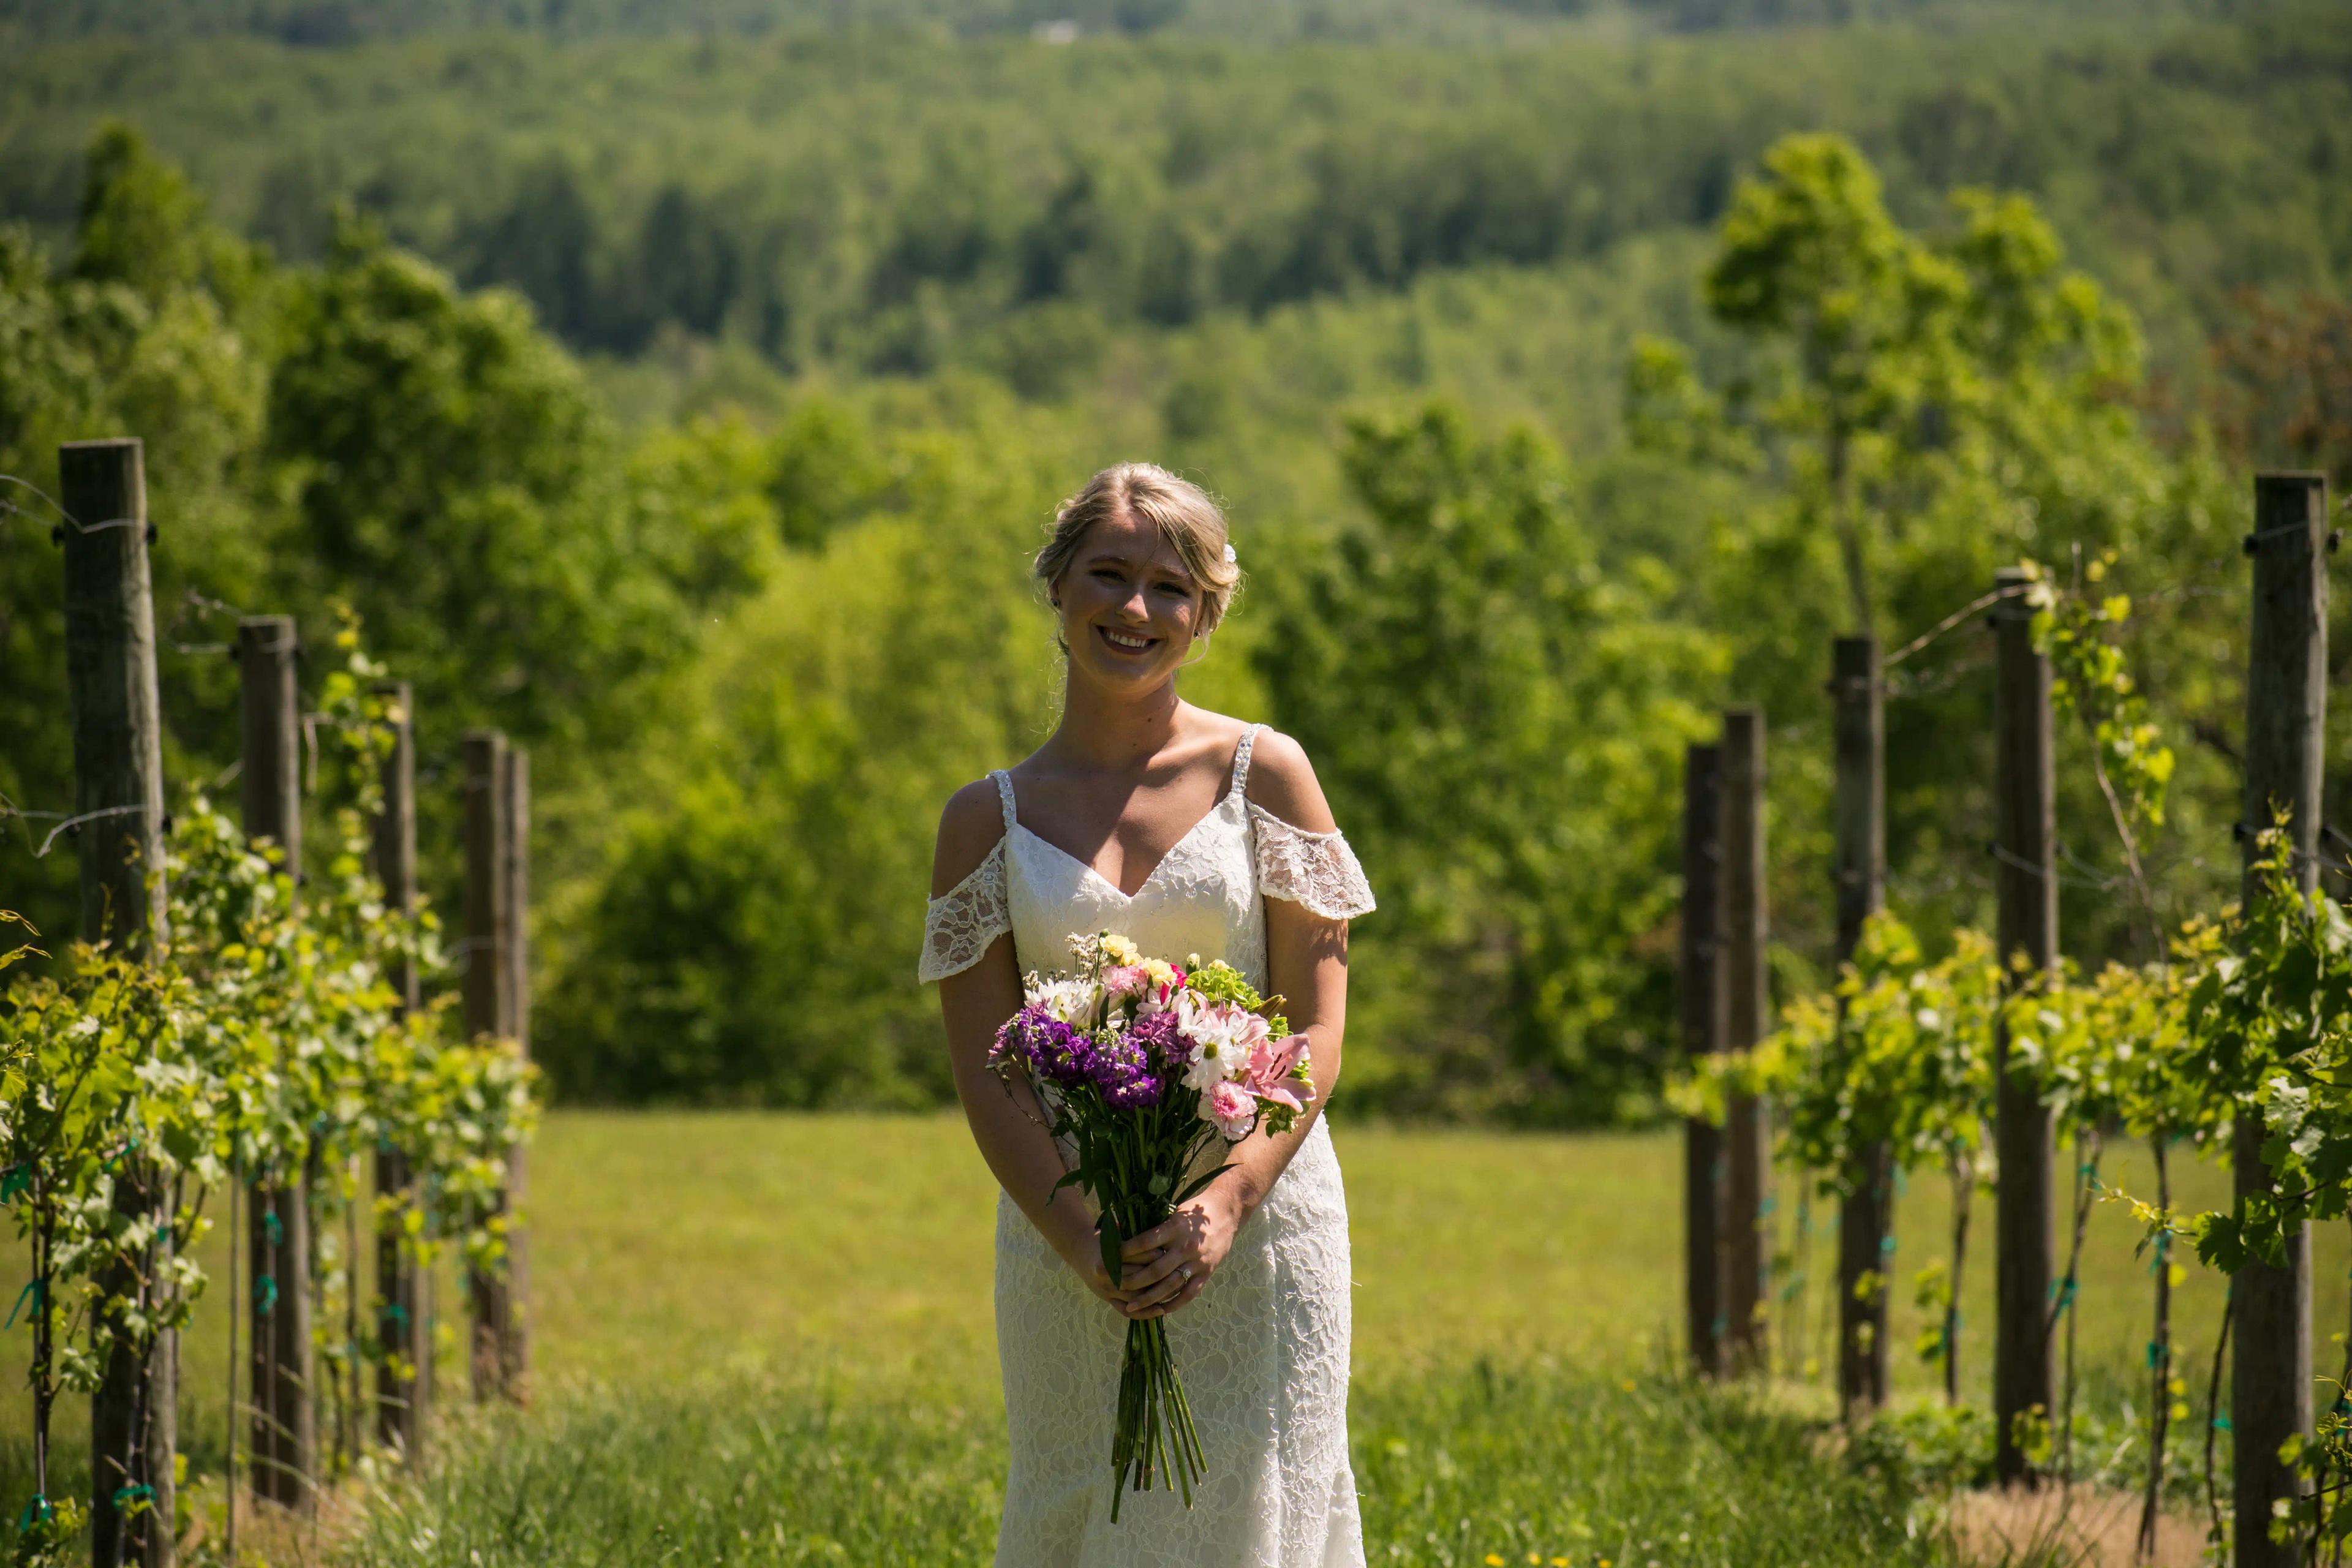 The bride standing in the middle of a vineyard with grape vines on either side with the bride in the middle smiling.